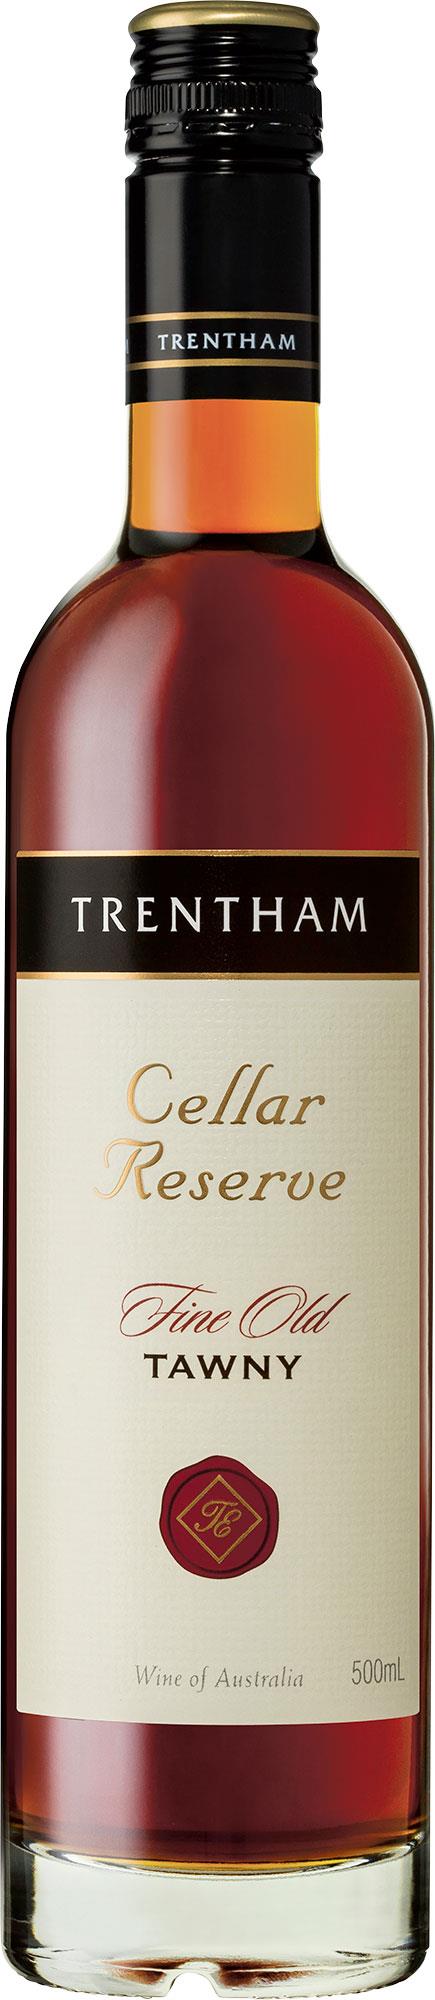 CELLAR RESERVE OLD TAWNY Murray Darling, Trentham 18% 50cl